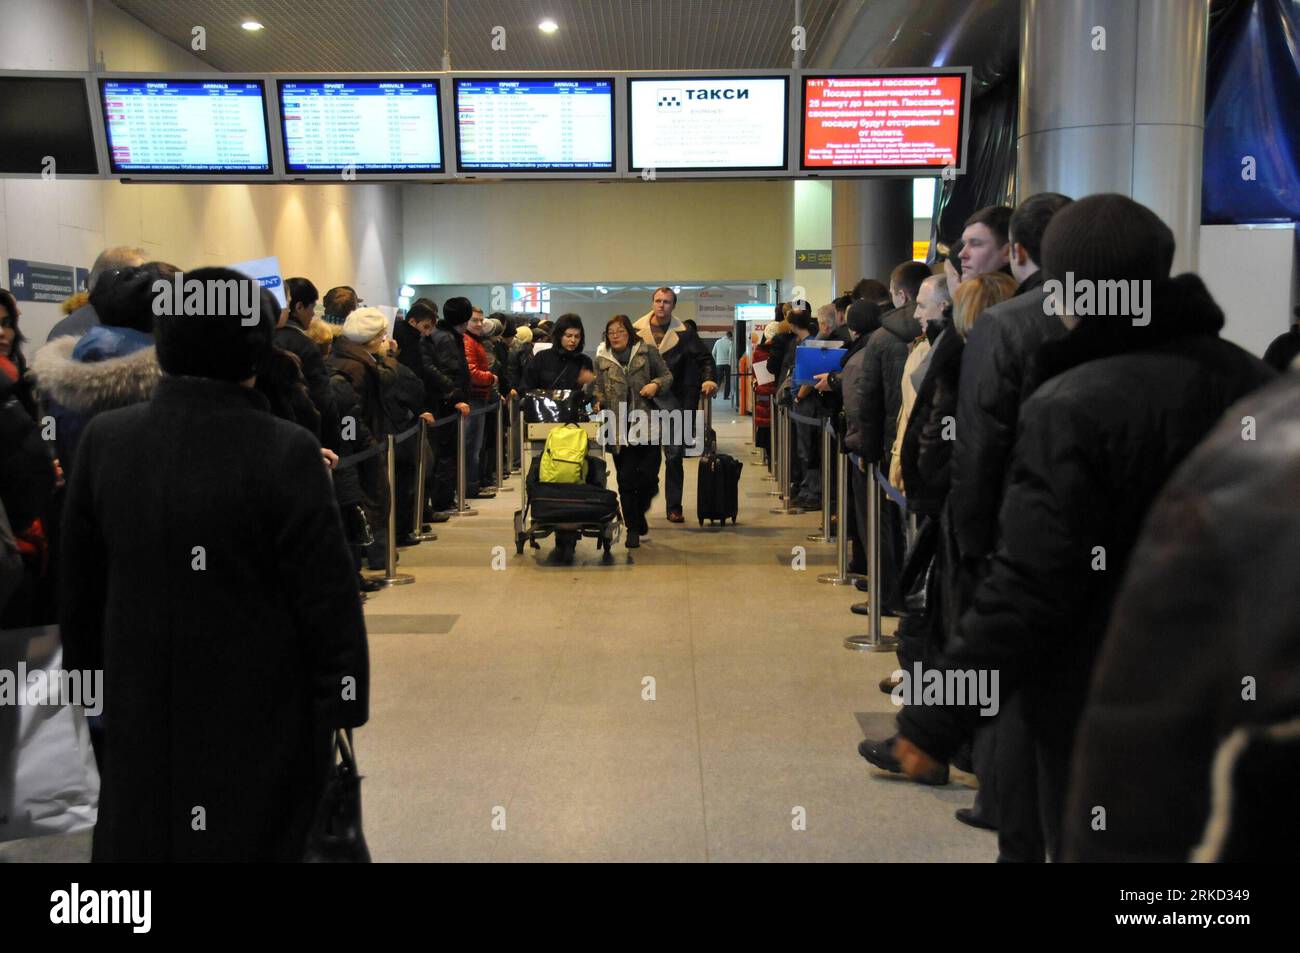 Bildnummer: 54852819  Datum: 25.01.2011  Copyright: imago/Xinhua (110126) -- MOSCOW, Jan. 26, 2011 (Xinhua) -- queue to wait for passengers upon their arrivals at Domodedovo Airport in Moscow, capital of Russia, Jan. 25, 2011. At least 35 were killed and over 130 others injured in the explosion at Moscow s Domodedovo airport on Monday. (Xinhua/Liu Kai) (lr) RUSSIA-MOSCOW-AIRPORT-NORMAL PUBLICATIONxNOTxINxCHN Gesellschaft Anschlag Terroranschlag Terror Terrorismus Selbstmordanschlag Bombenanschlag Luftfahrt Verkehr Flughafen kbdig xsk 2011 quer o0 Warten, Ankunft    Bildnummer 54852819 Date 25 Stock Photo